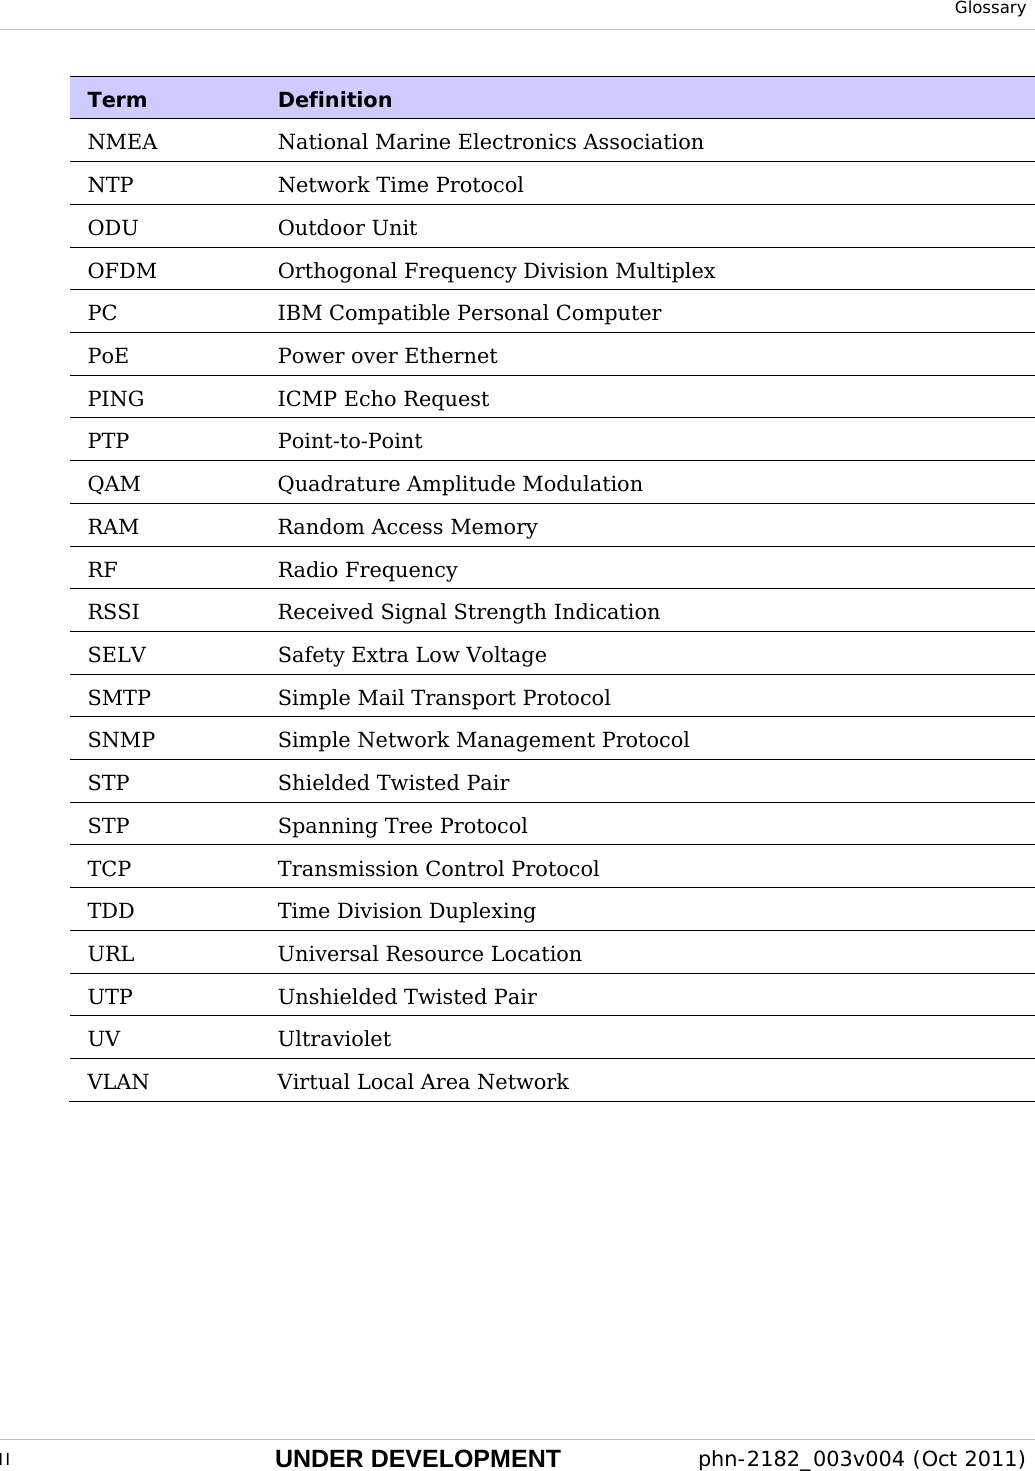  Glossary  II UNDER DEVELOPMENT  phn-2182_003v004 (Oct 2011)  Term  Definition NMEA National Marine Electronics Association NTP  Network Time Protocol ODU Outdoor Unit OFDM  Orthogonal Frequency Division Multiplex PC  IBM Compatible Personal Computer PoE Power over Ethernet PING ICMP Echo Request PTP Point-to-Point QAM Quadrature Amplitude Modulation RAM  Random Access Memory RF Radio Frequency RSSI  Received Signal Strength Indication SELV  Safety Extra Low Voltage SMTP  Simple Mail Transport Protocol SNMP  Simple Network Management Protocol STP  Shielded Twisted Pair STP  Spanning Tree Protocol TCP  Transmission Control Protocol TDD Time Division Duplexing URL  Universal Resource Location UTP Unshielded Twisted Pair UV Ultraviolet VLAN  Virtual Local Area Network    